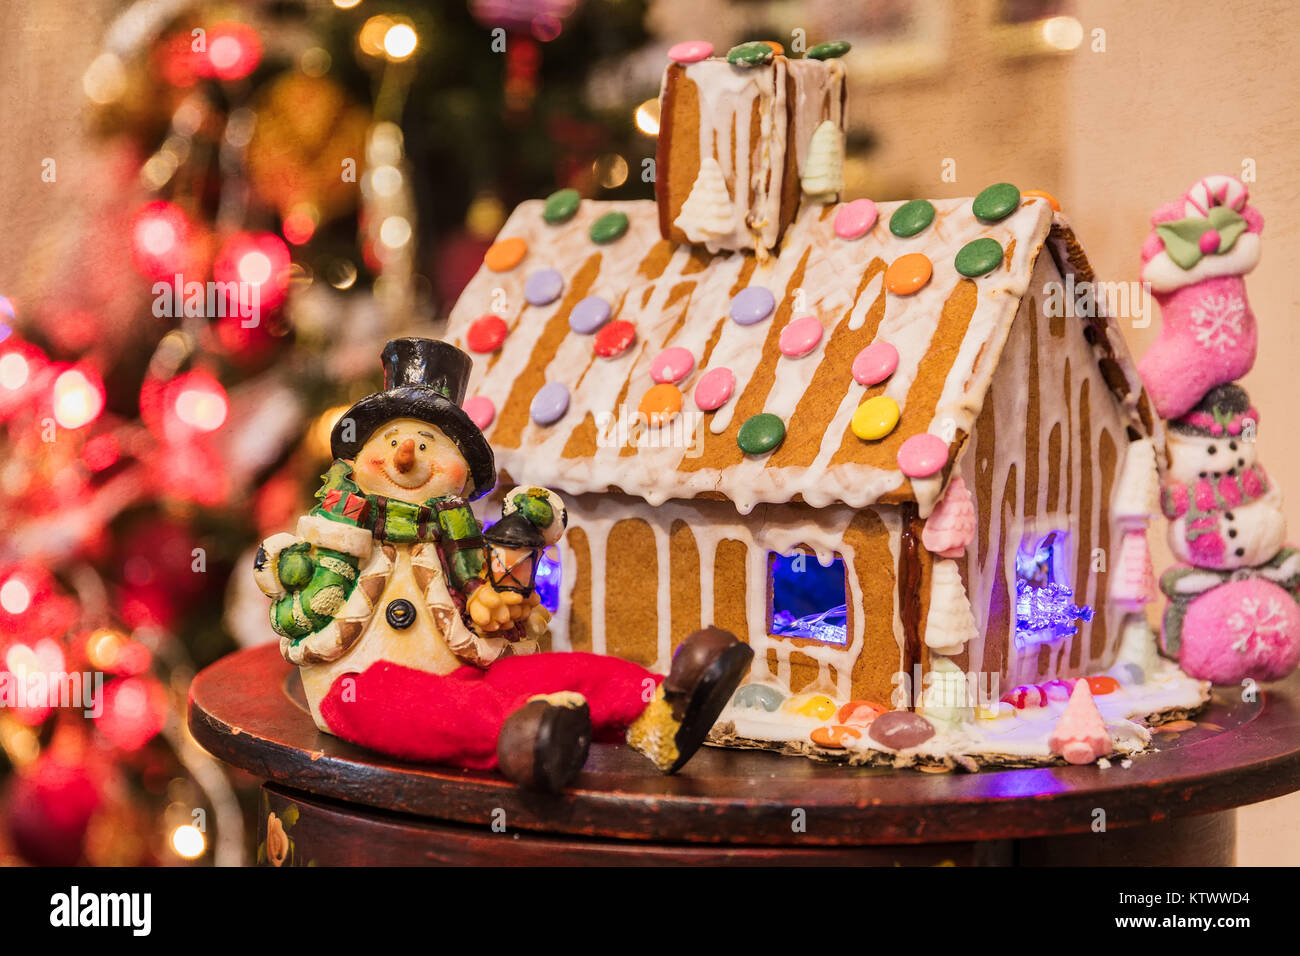 Natale gingerbread cookie house. celective focus Foto Stock